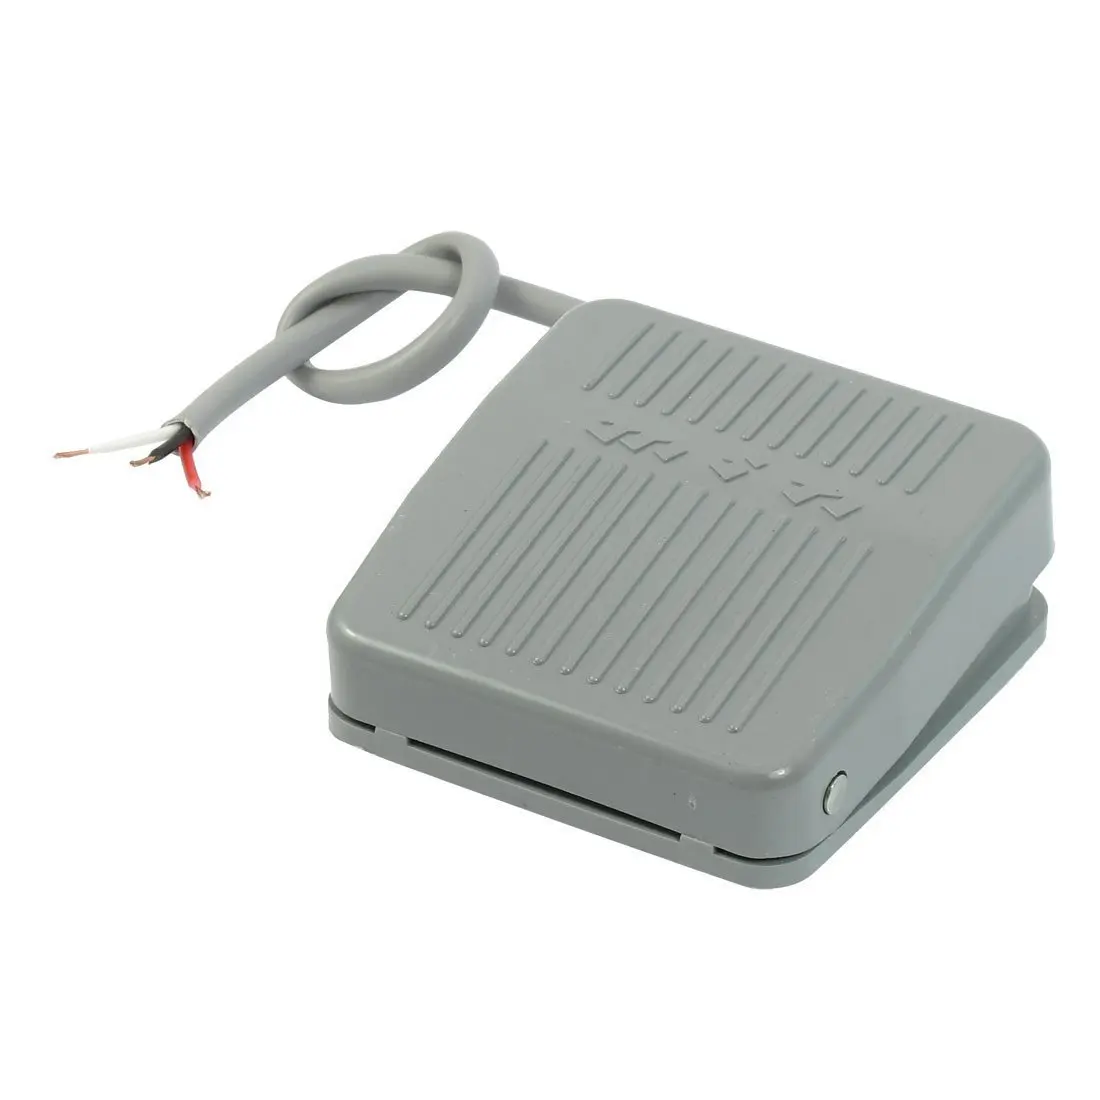 Baomain Foot Pedal Switch TFS-201 Hands Free Nonslip On Off Momentary AC 250V 10A Gray